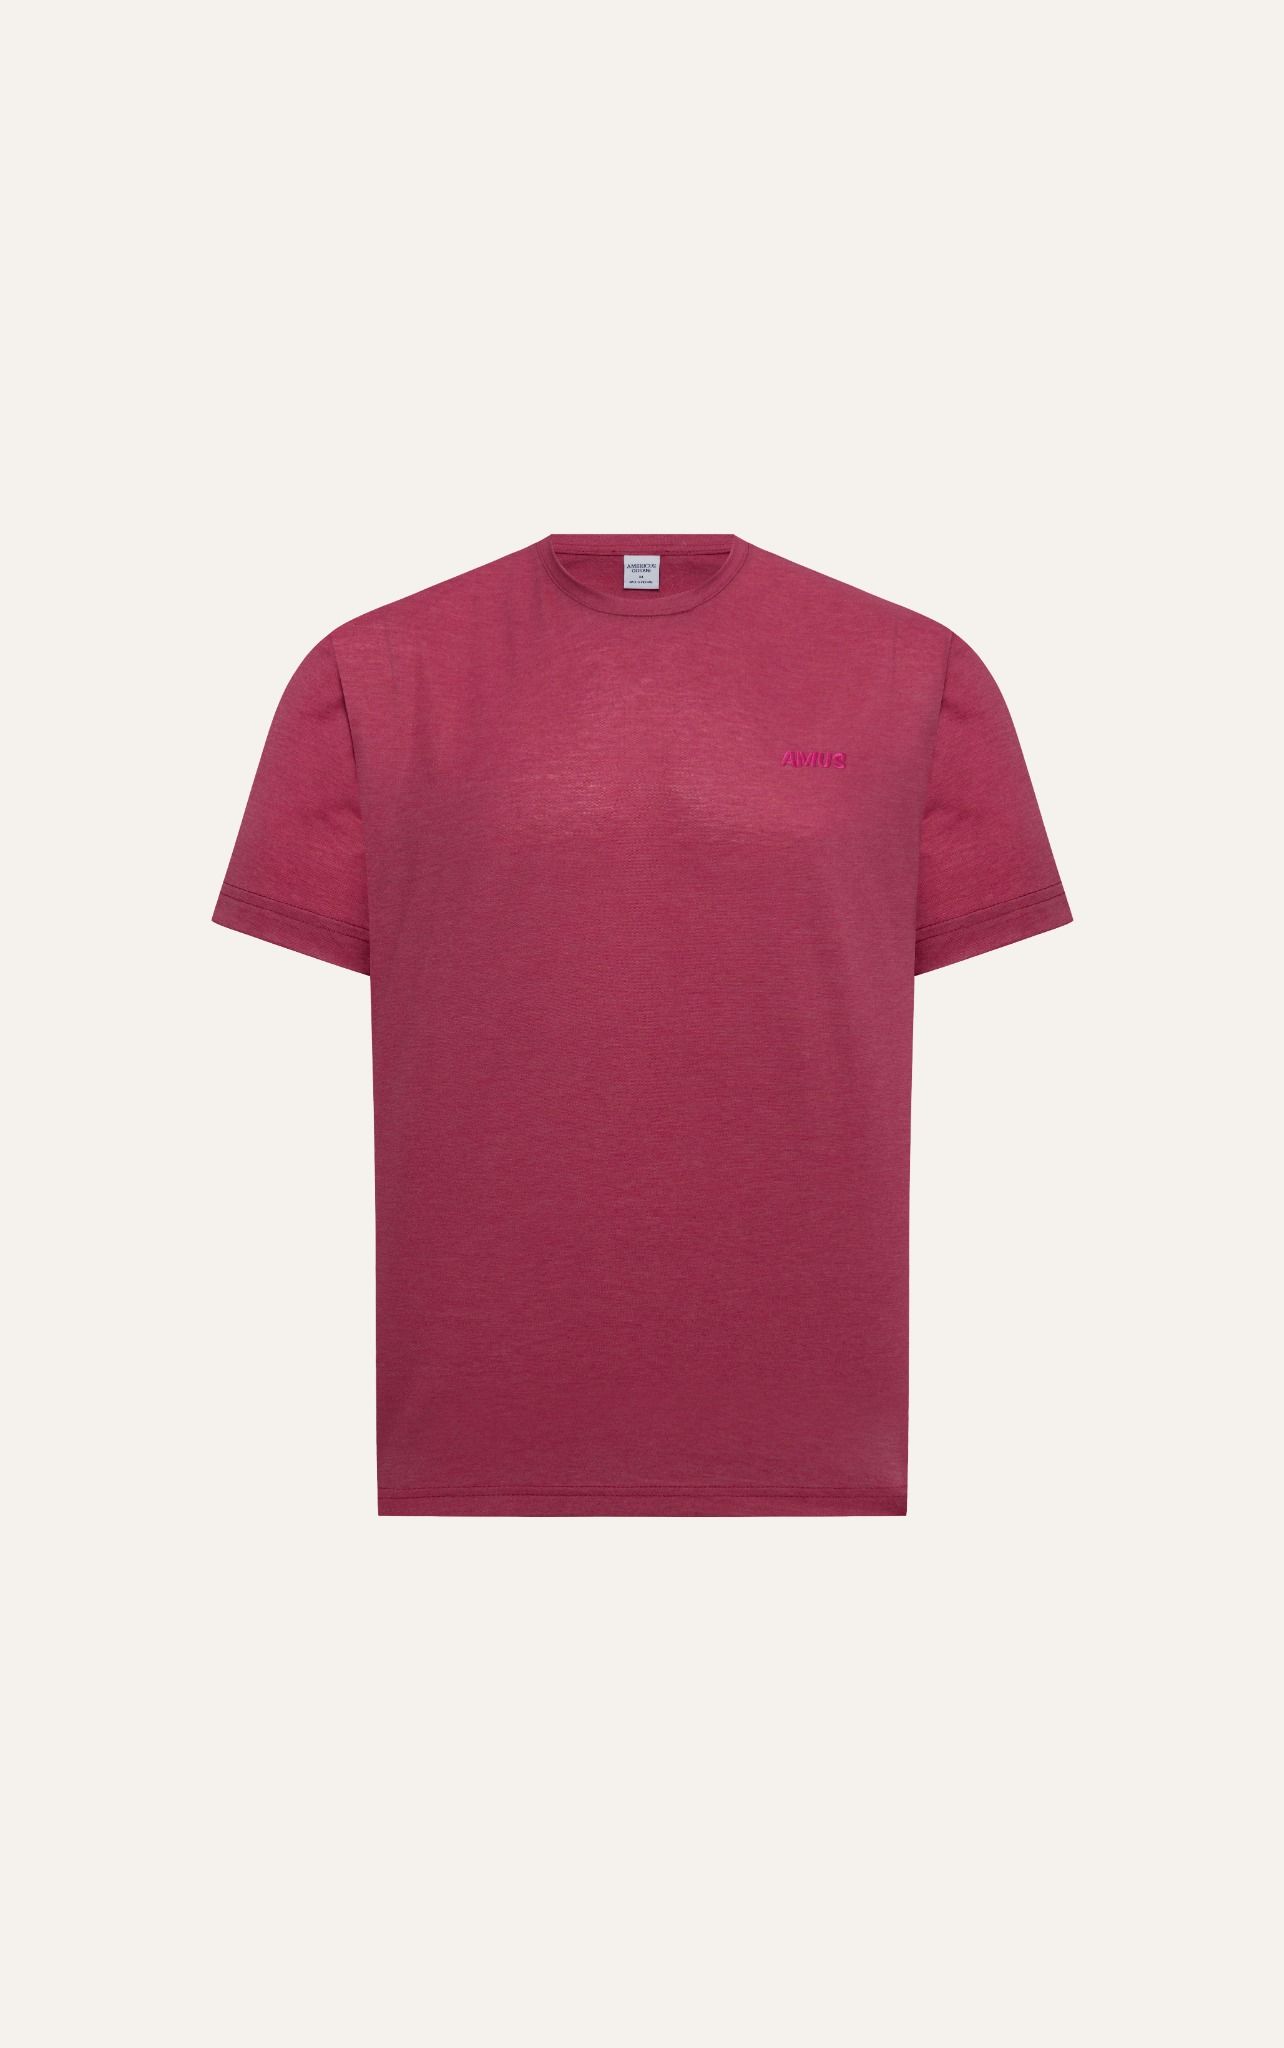  AG60 FACTORY REGULAR FIT EMBROIDERED "AMUS" T-SHIRT - PINK 